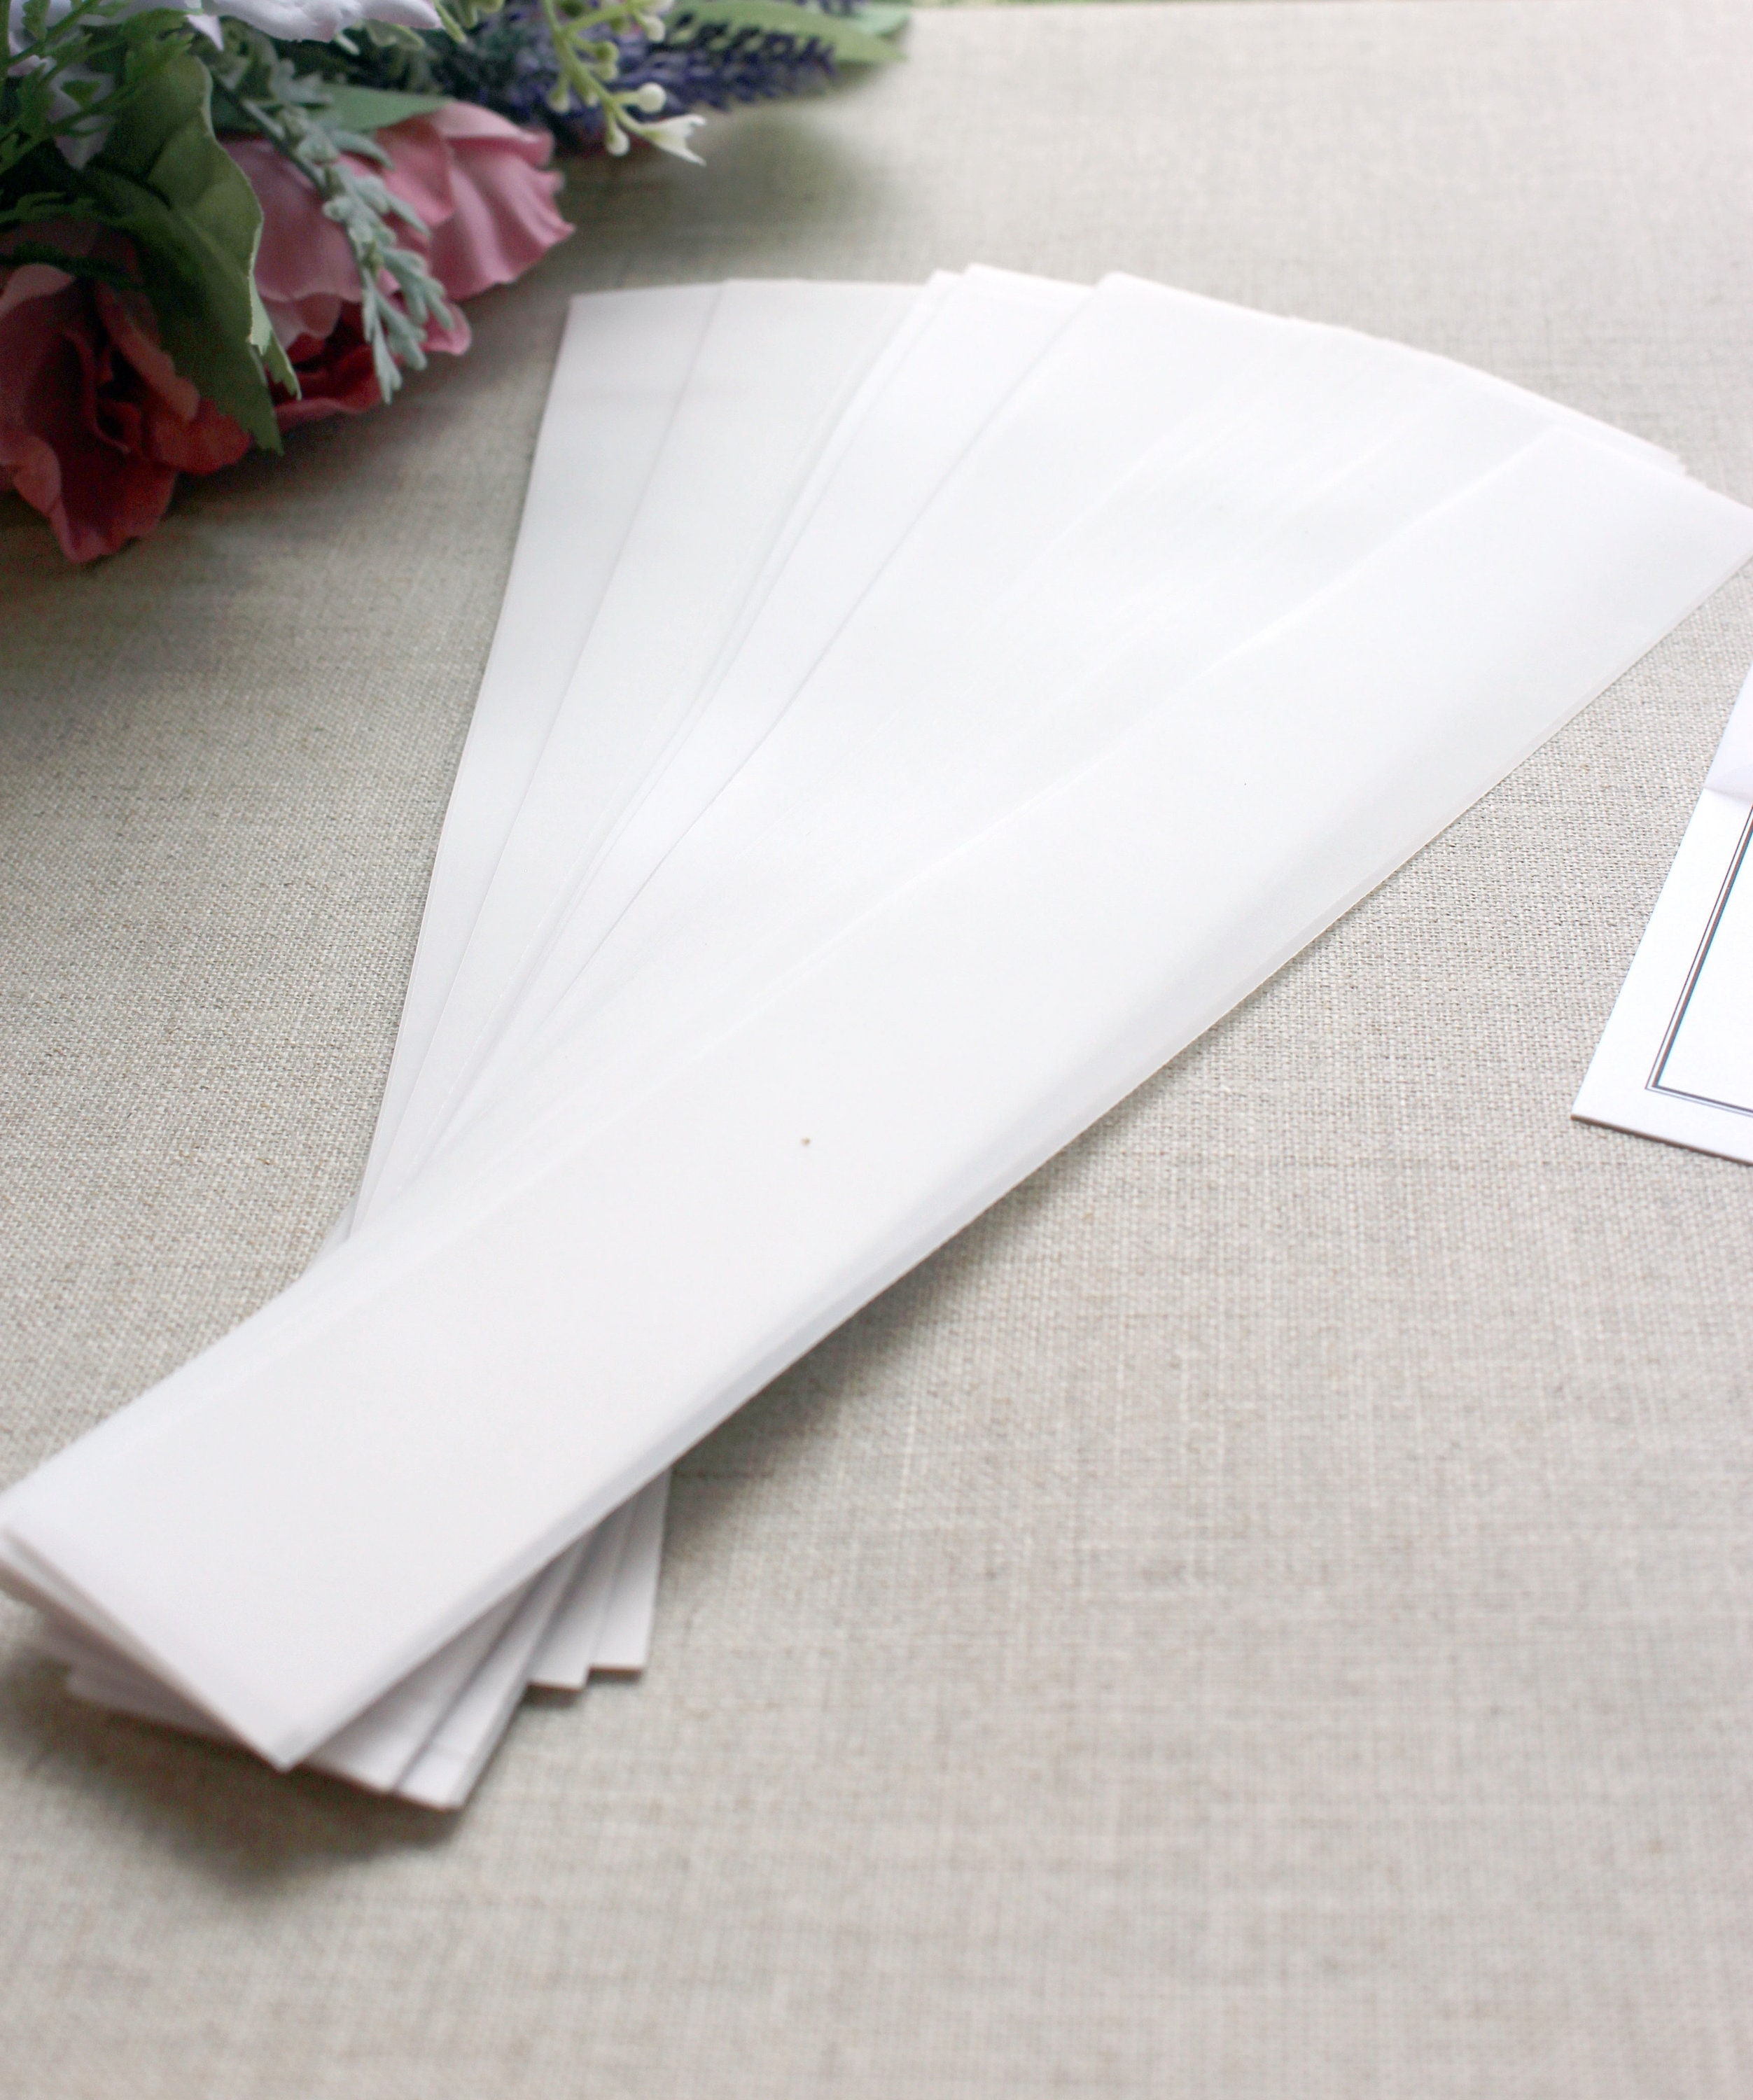  Vellum Belly Bands for Invitations, Translucent Vellum Wrap  Paper 5 X 7 Wraps, Pack of 50 Vellum Bands 1.5 x 11 inches : Handmade  Products